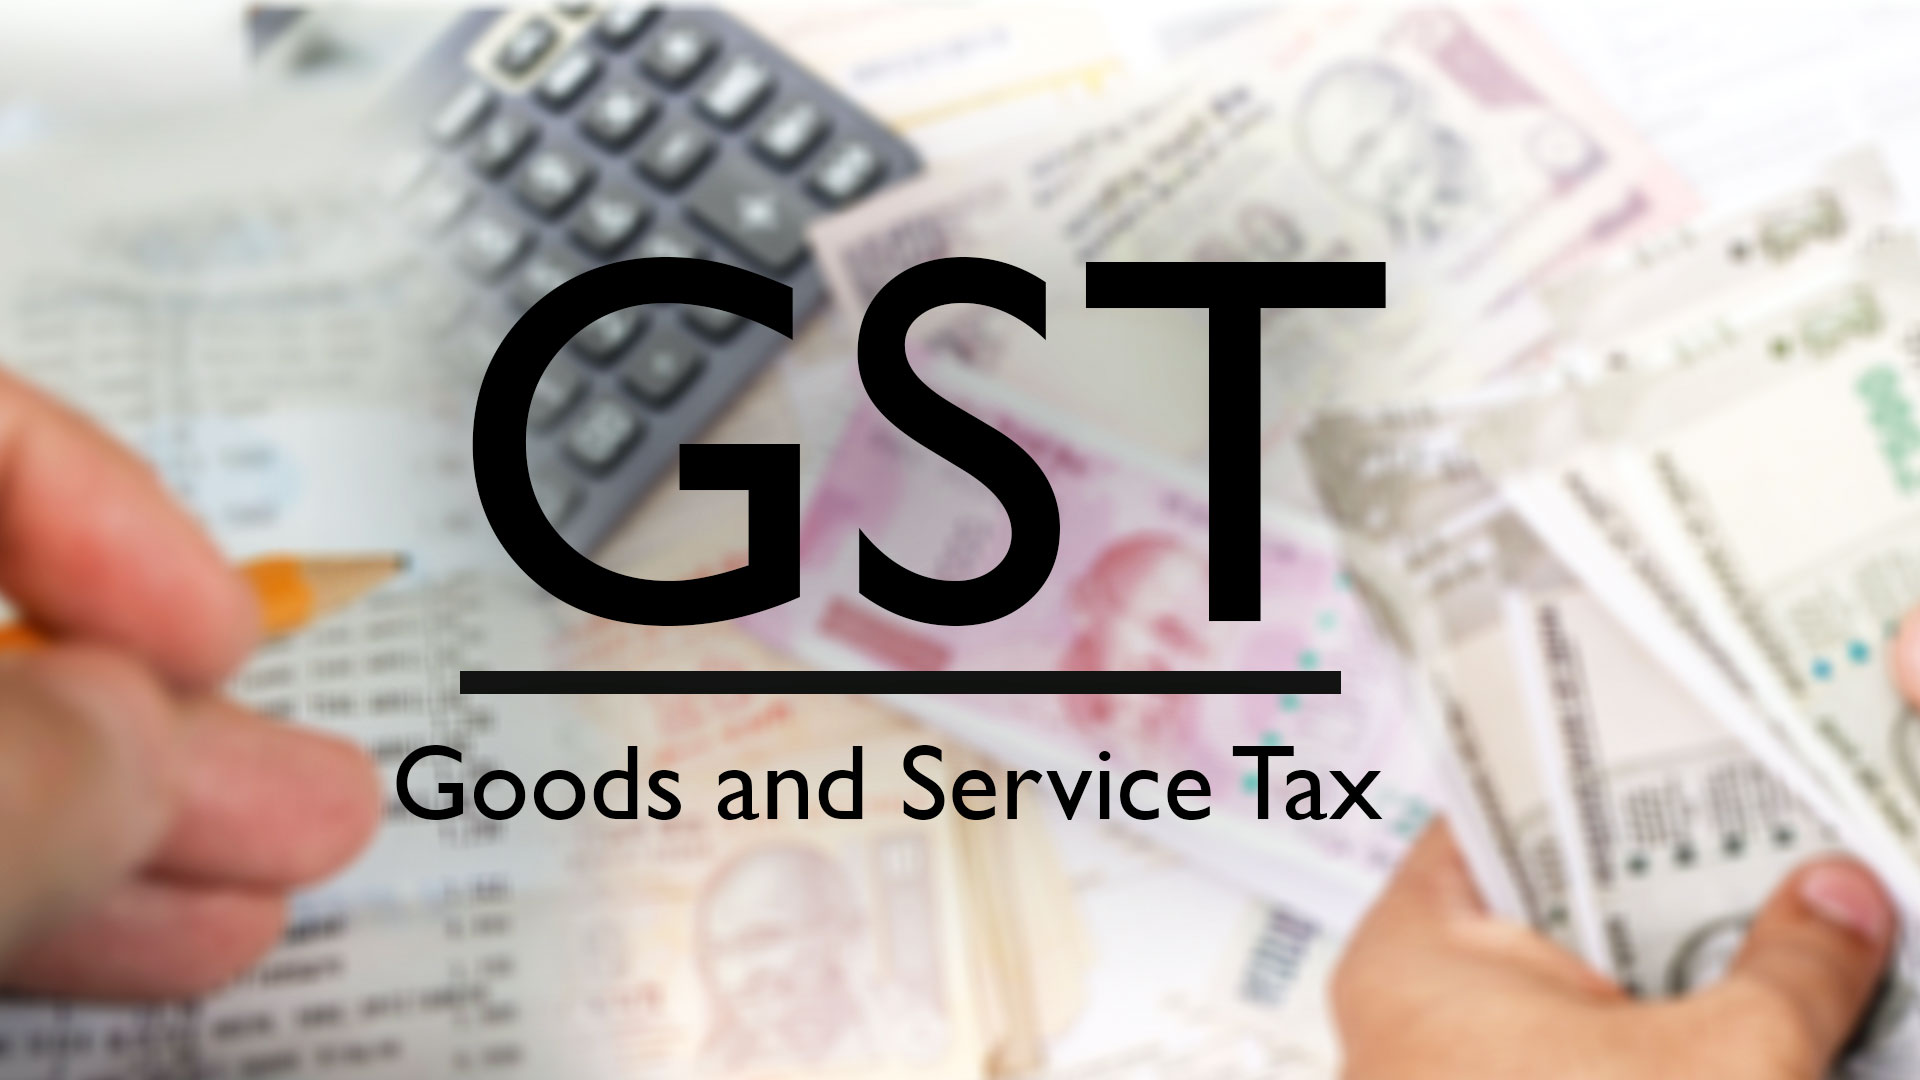 GST: Goods and Services Tax